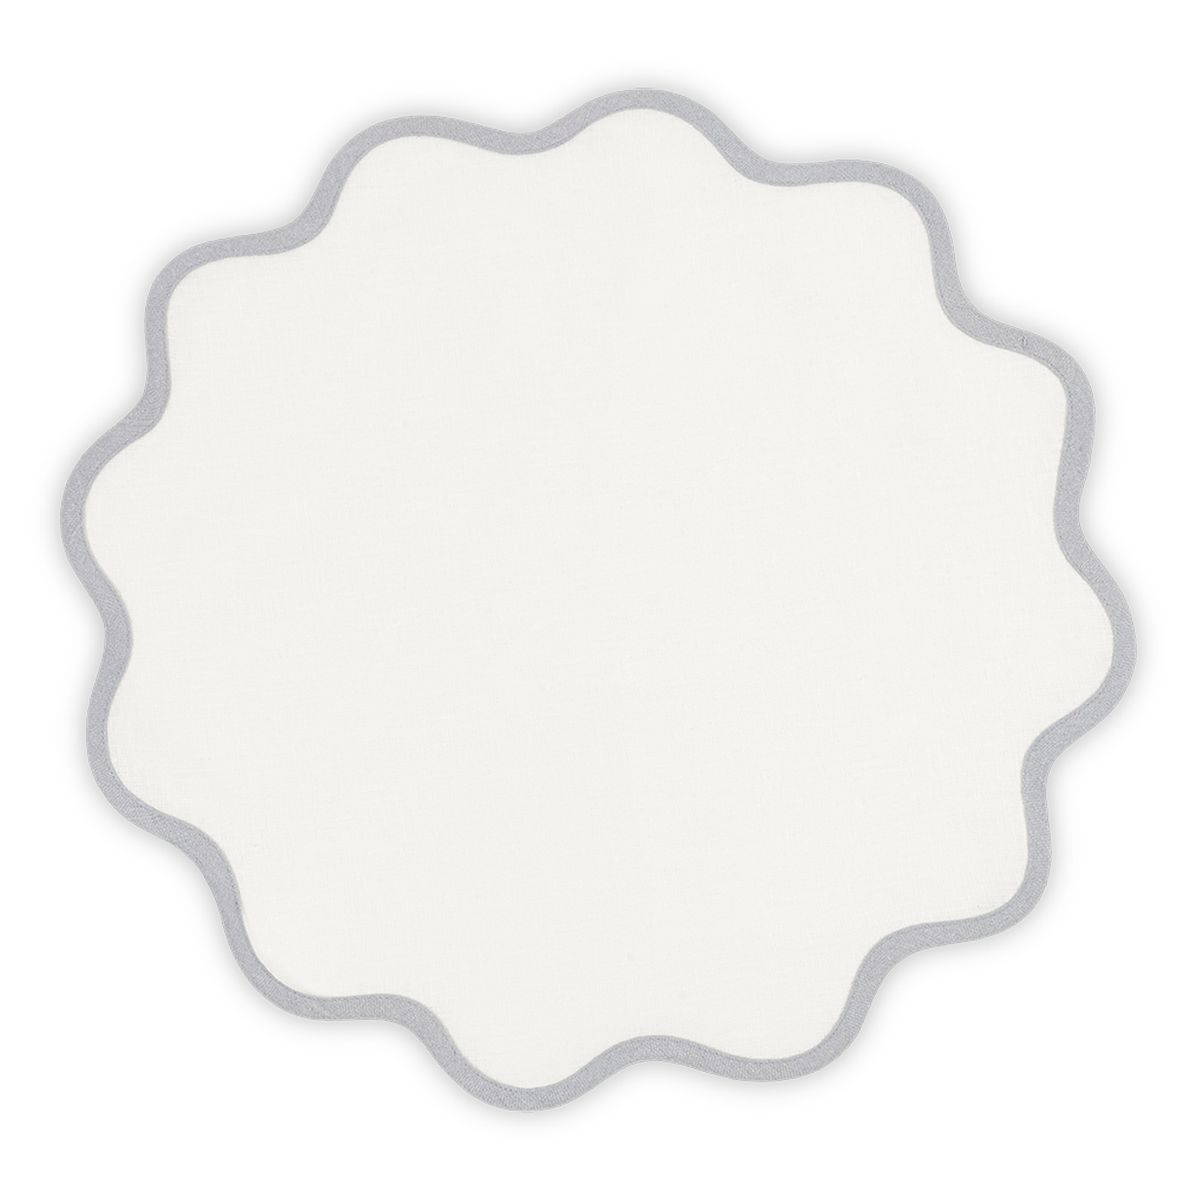 Silo Image of Matouk Scallop Edge Circle Placemat in Color Classic Grey